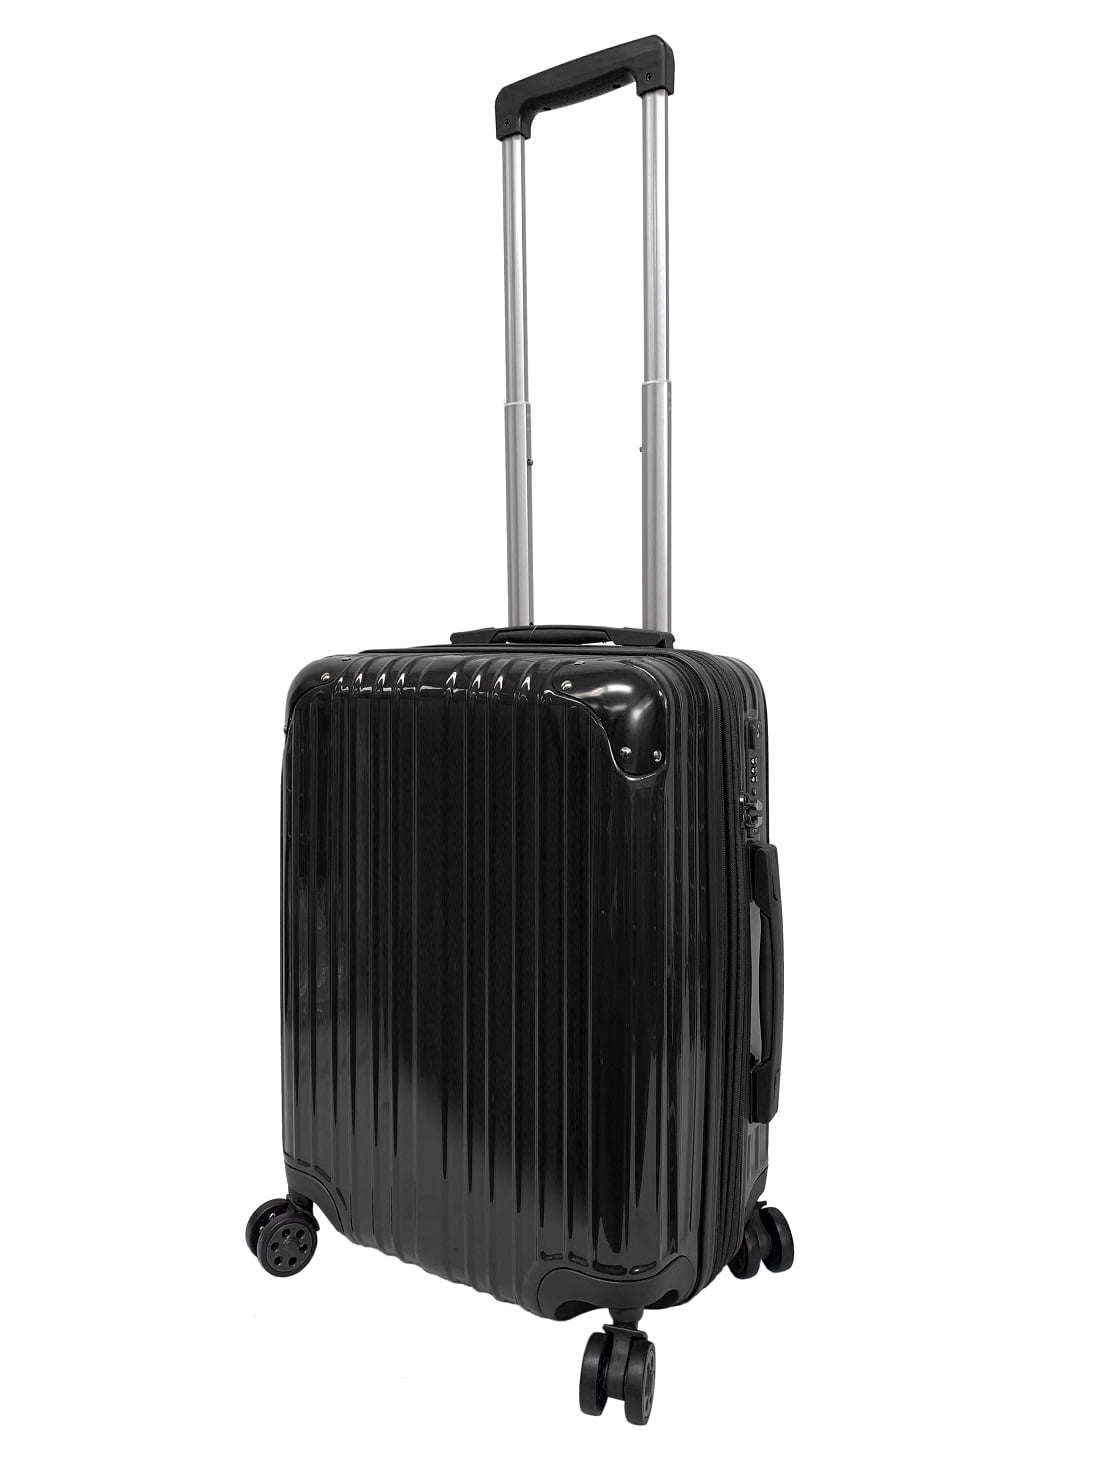 Hardside Carry-On Luggage Spinner Expandable Hand Carry Rolling Travel ...